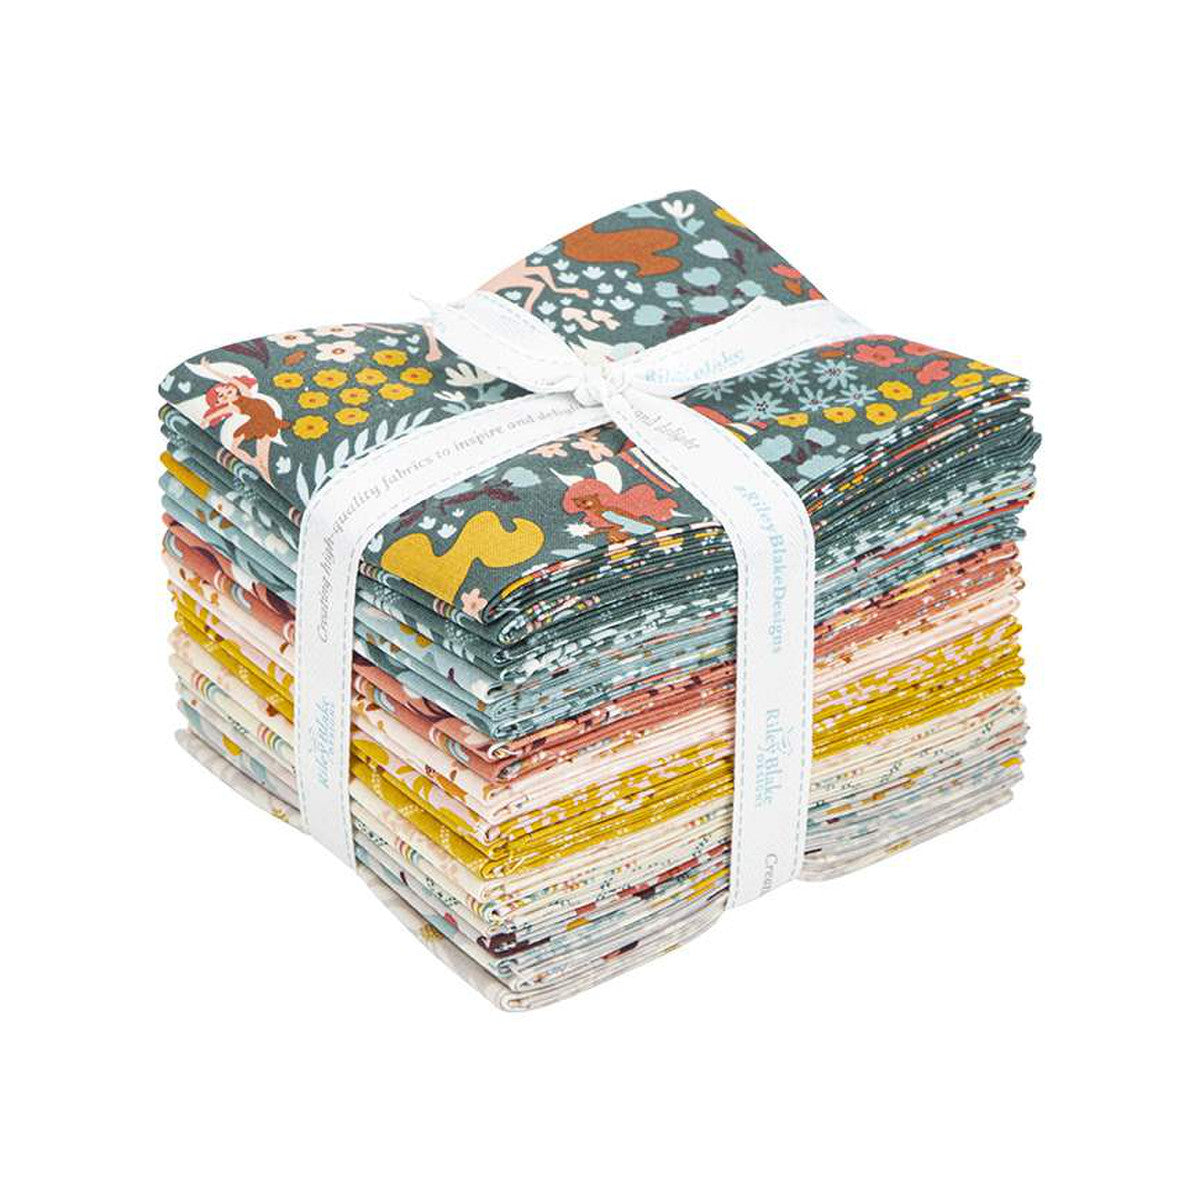  This Fat Quarter precut bundle includes 21 pieces from the Fairy Dust collection by Ashley Collett Design for Riley Blake Designs.(18